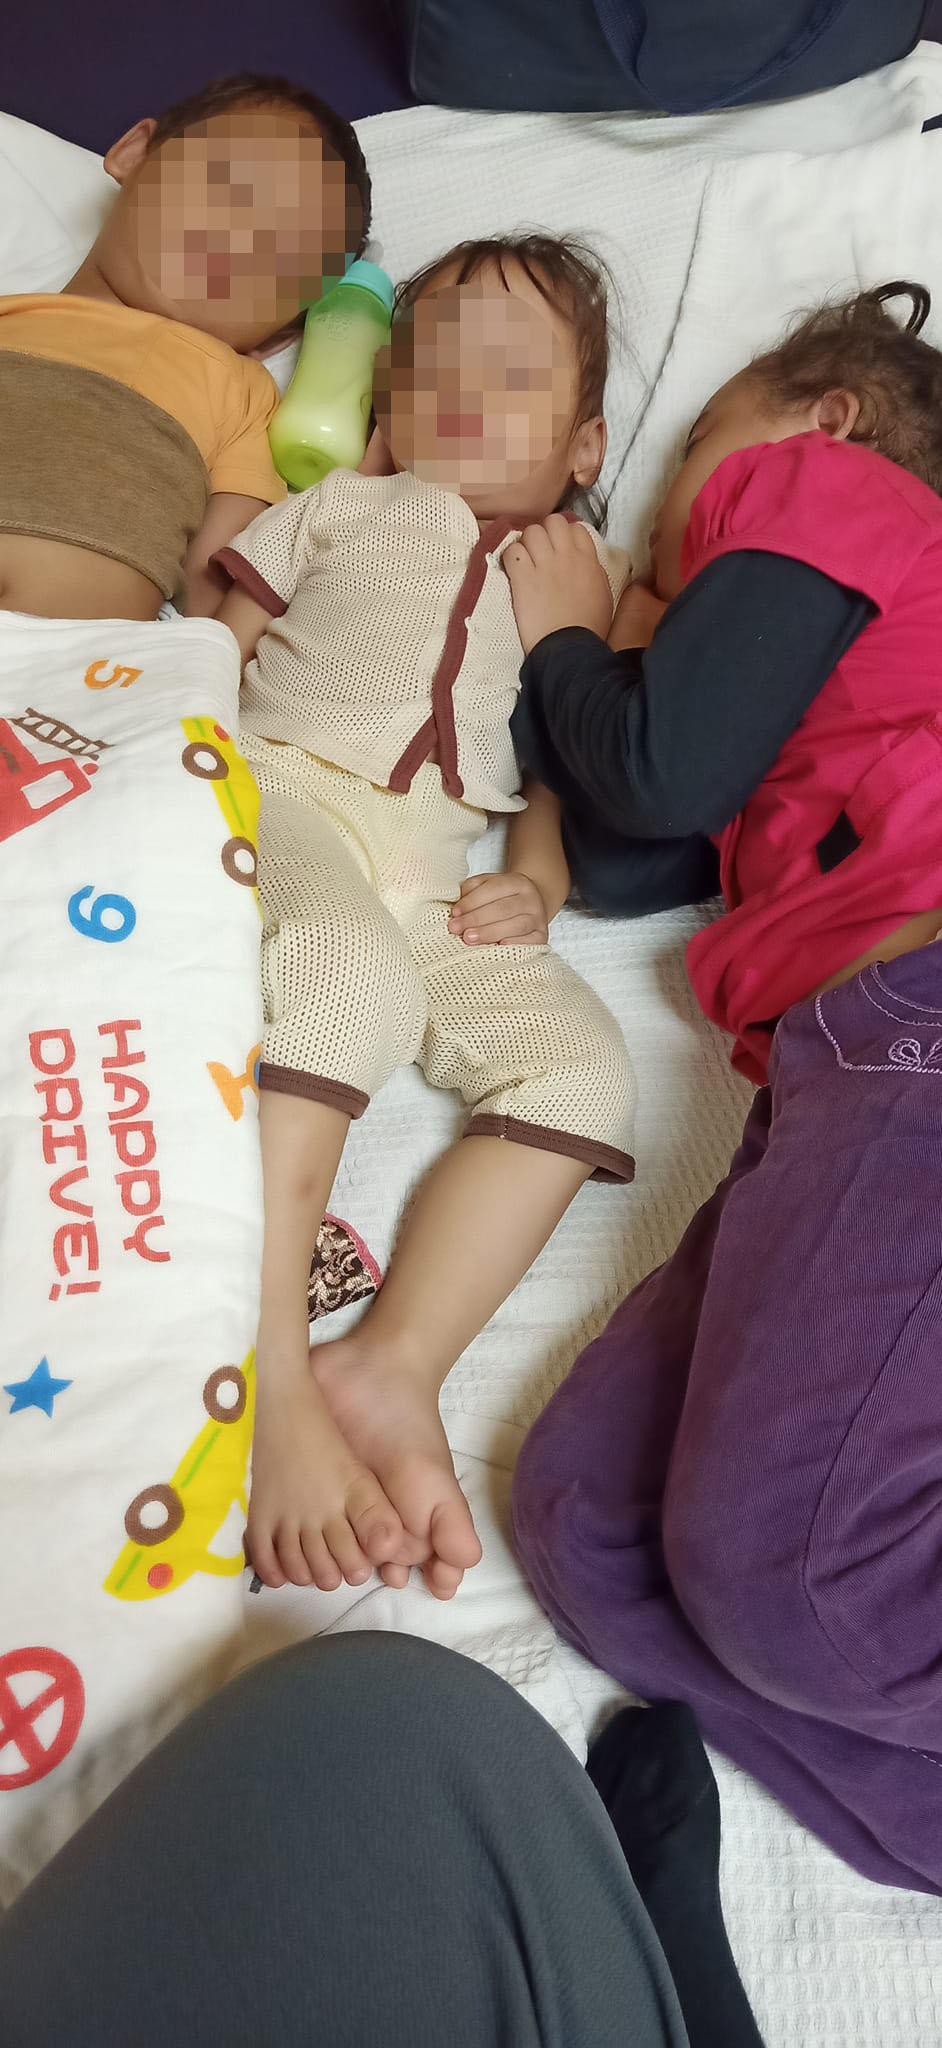 Nur Jalilah said that her children had passed out in the her car due to carbon monoxide poisoning. Image credit: Nur Jalilah Leyla